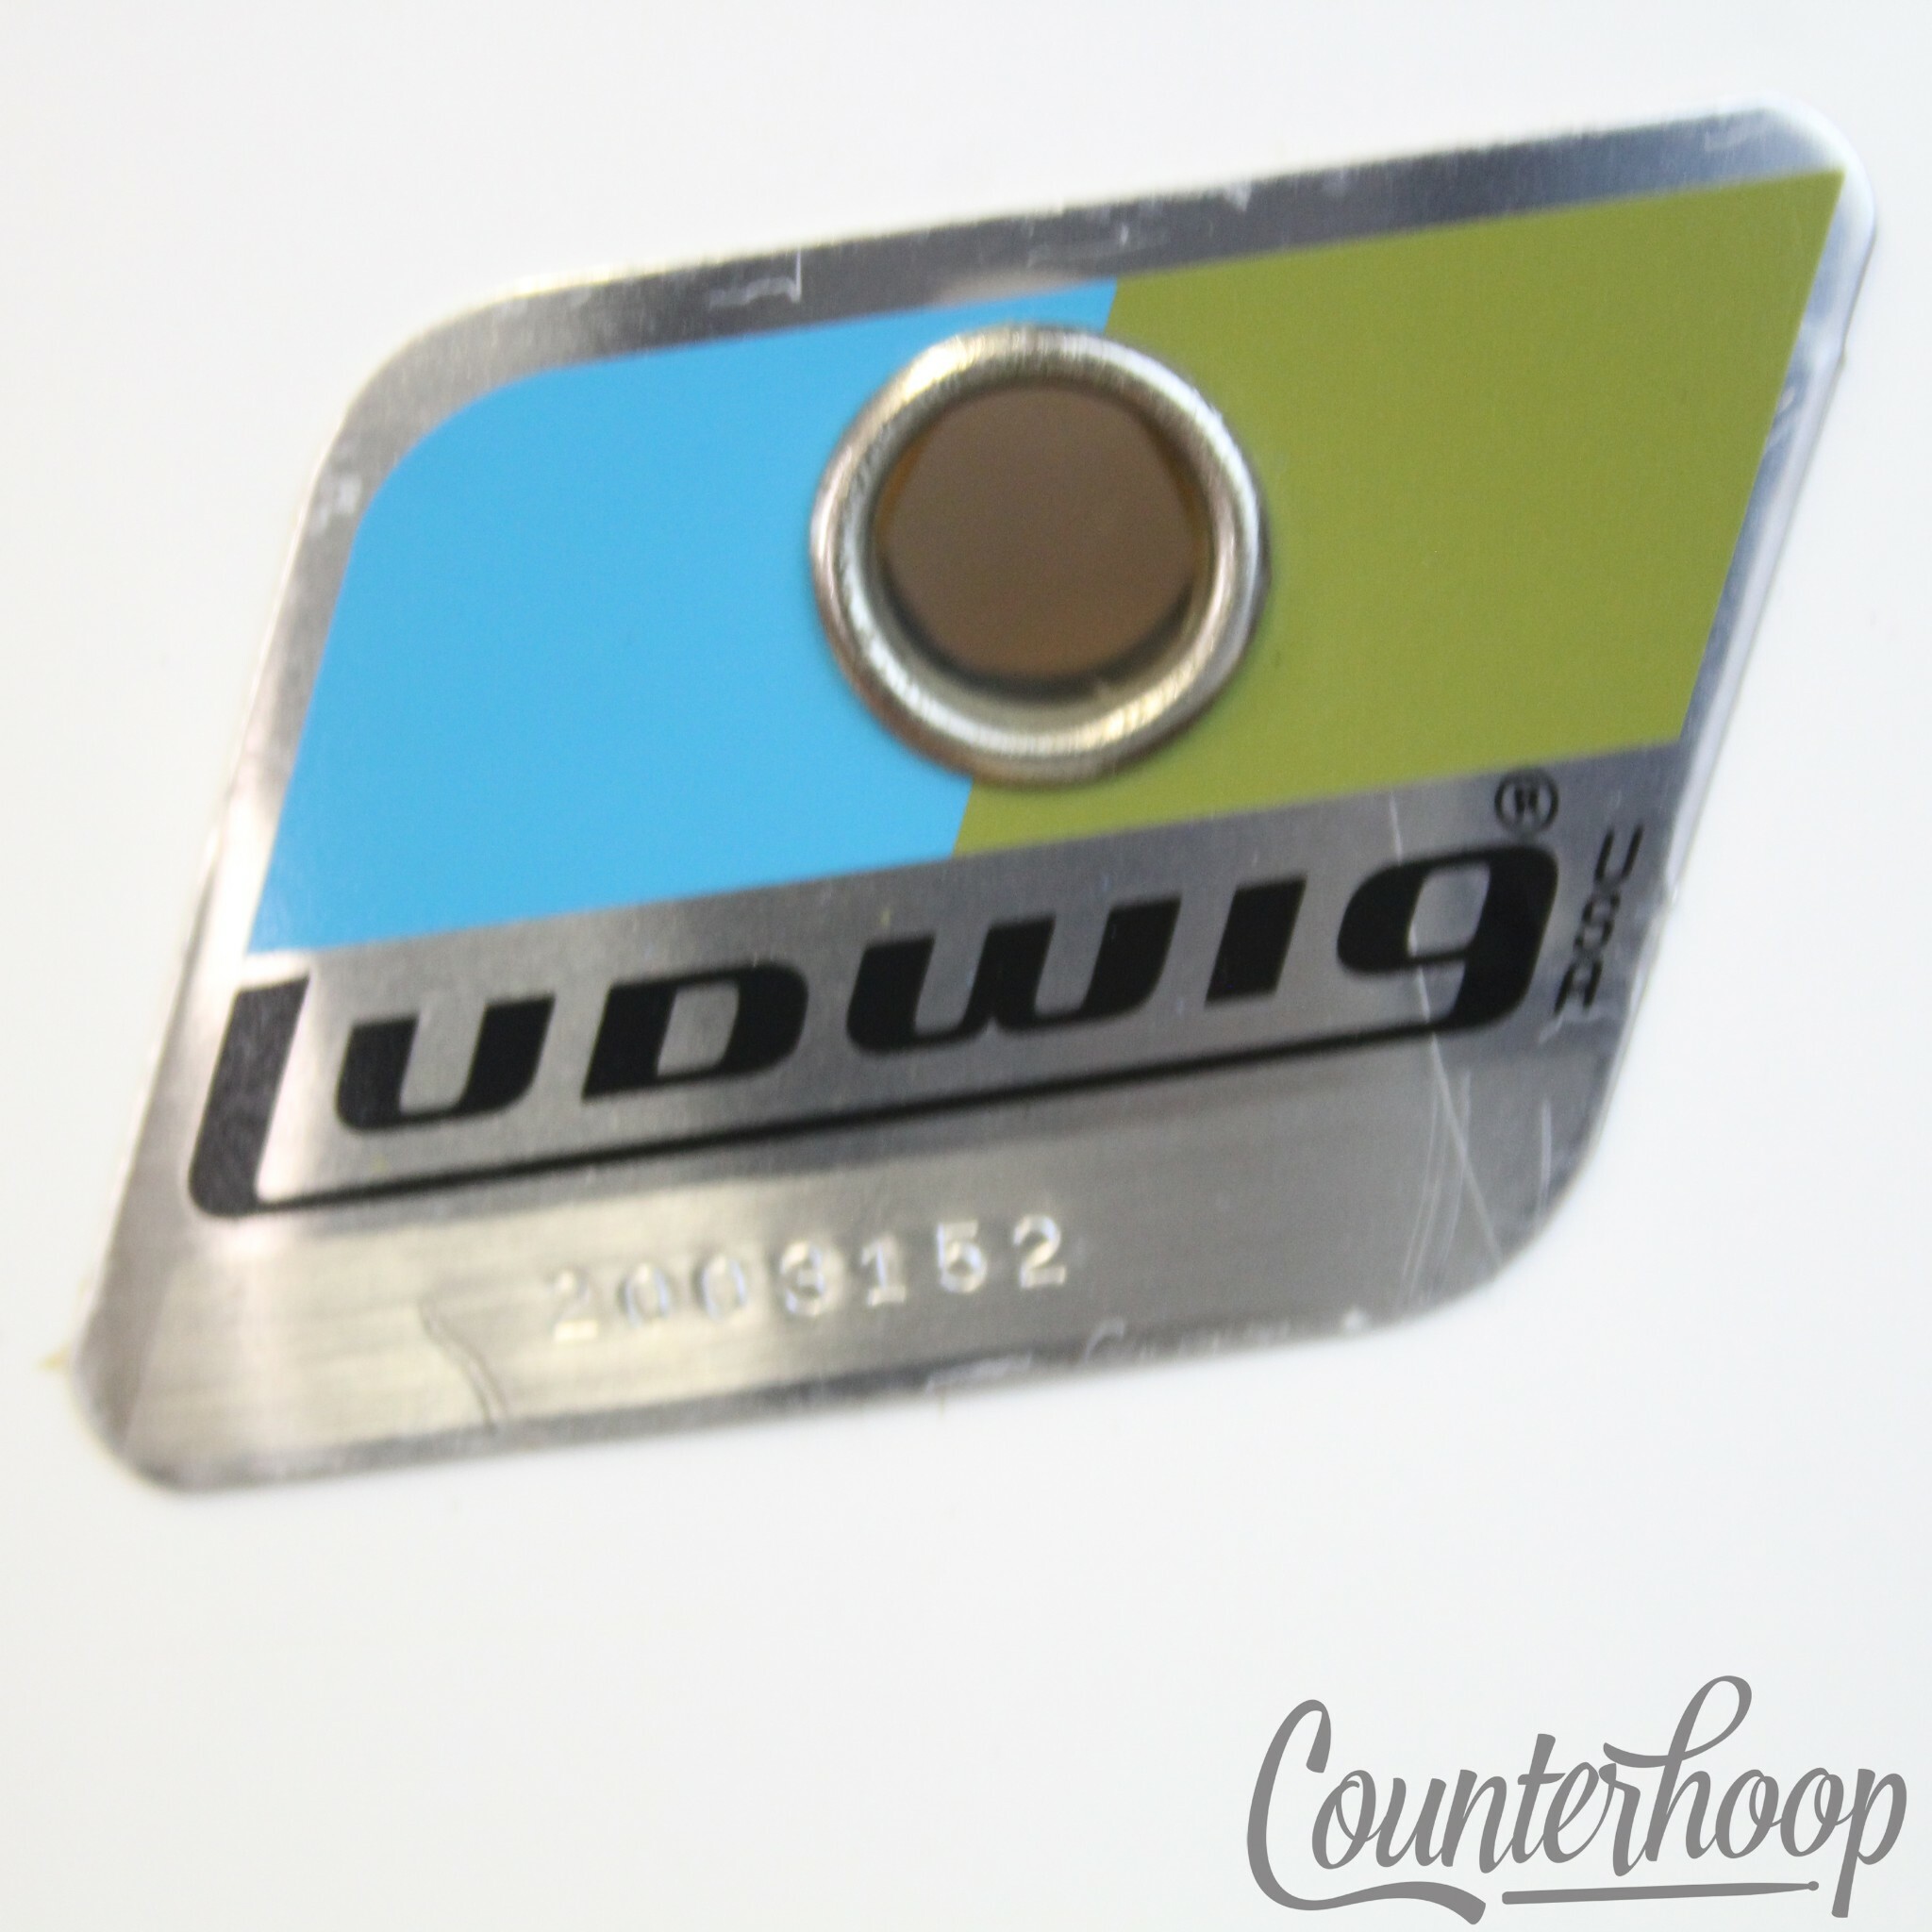 ludwig serial numbers black and white badge